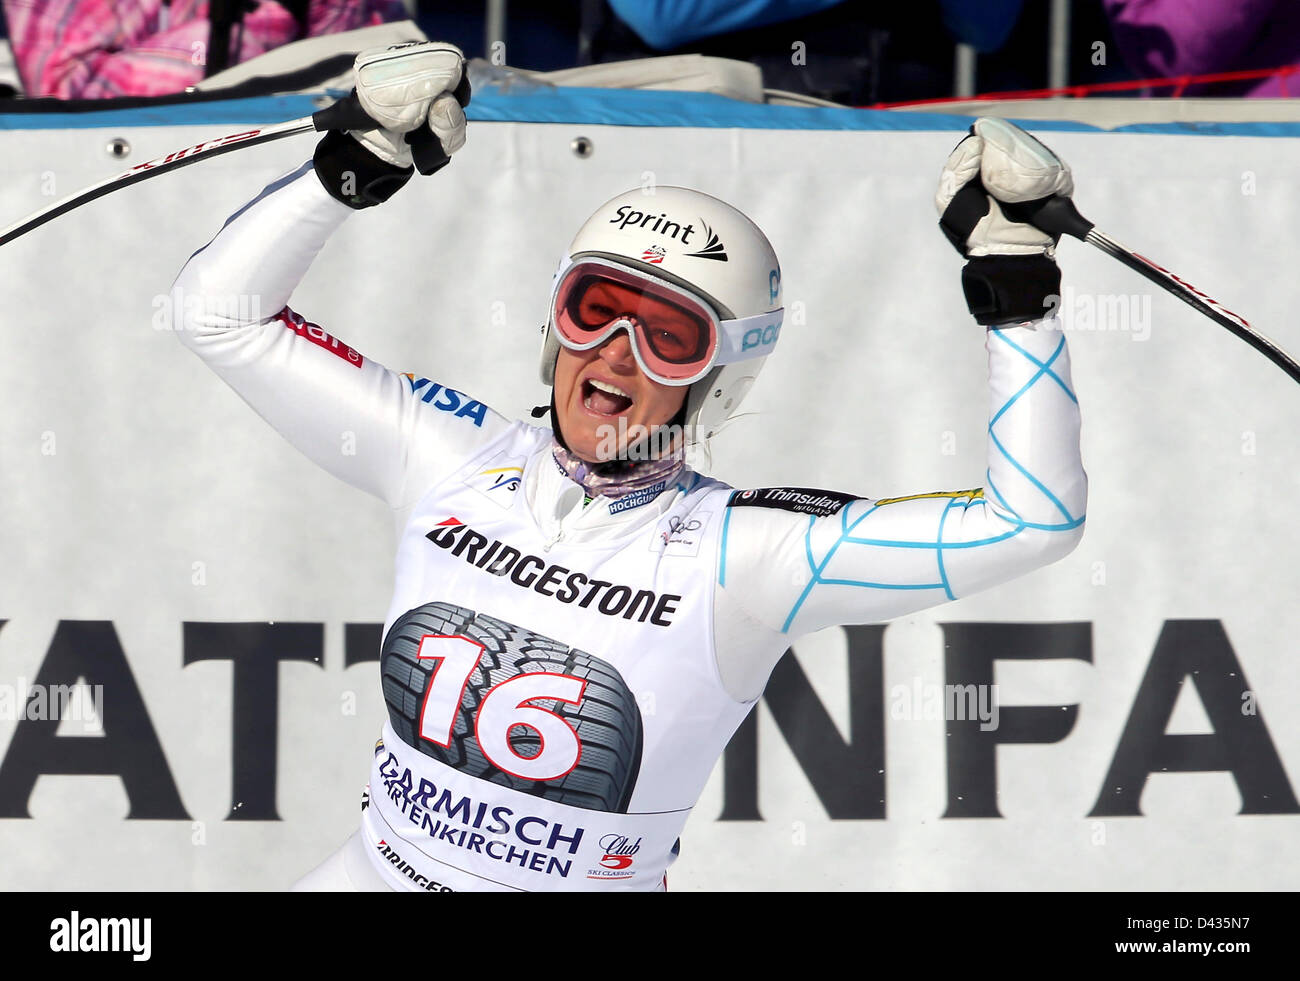 USA's Julia Mancuso cheers after the Super-G competition of the Alpine Skiing World Cup in Garmisch-Partenkirchen, Germany, 03 March 2013. Photo: STEPHAN JANSEN Stock Photo